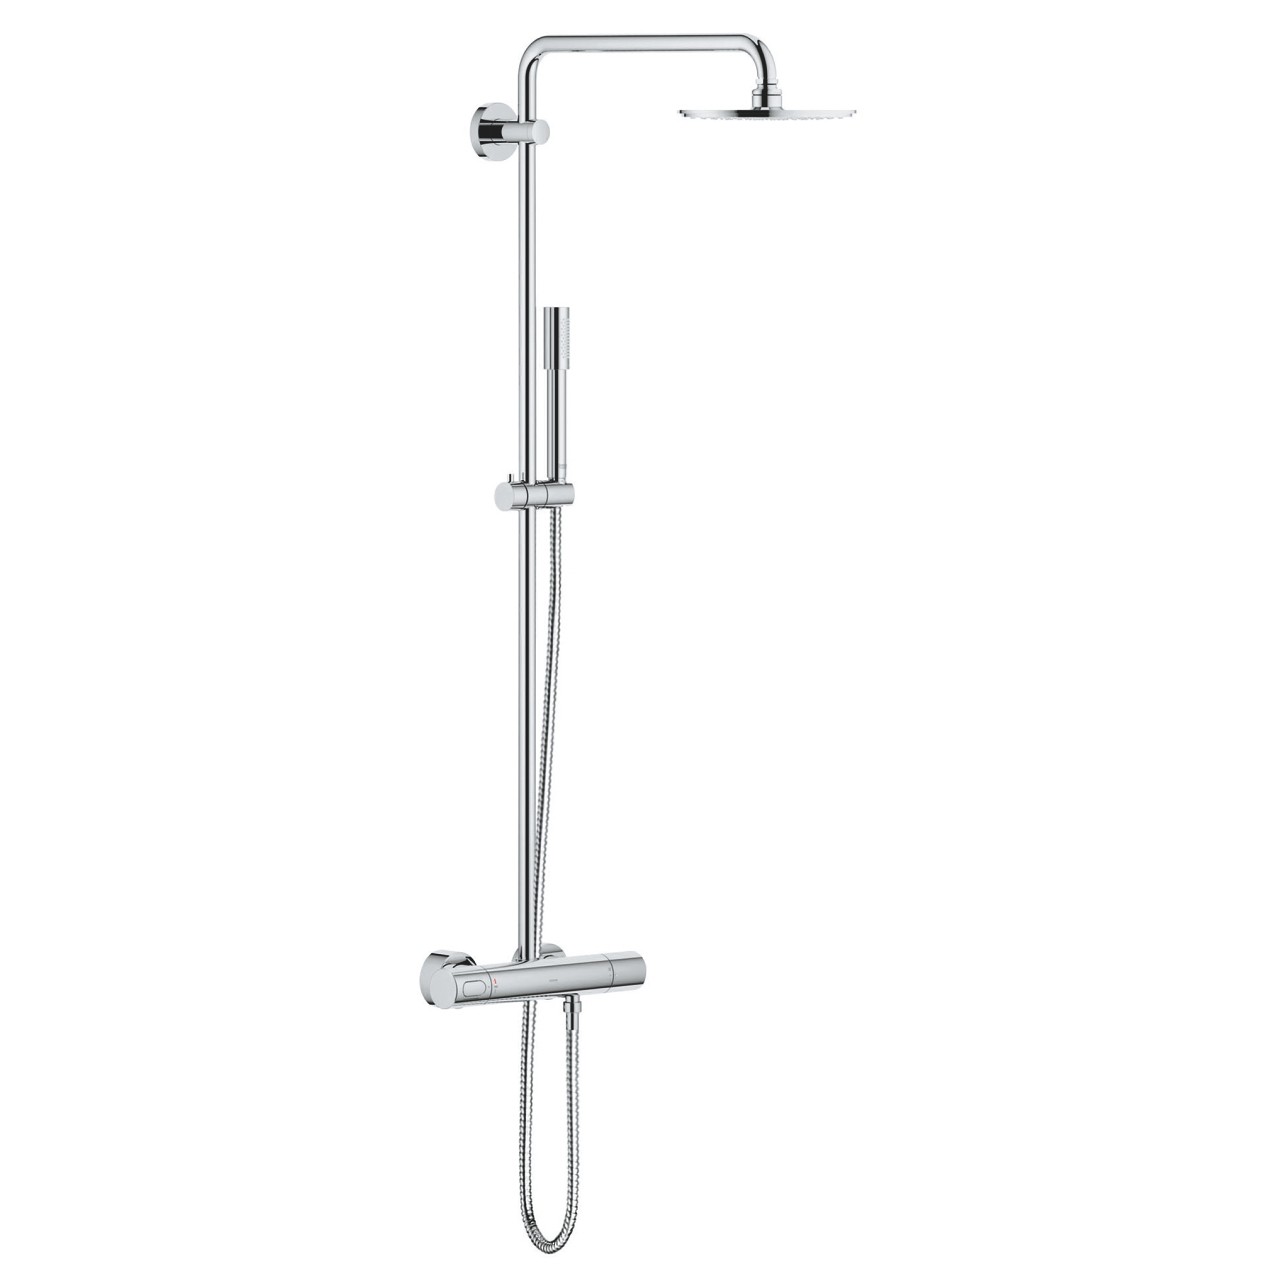 Grohe 27032001 Shower System with Thermostat, Chrome